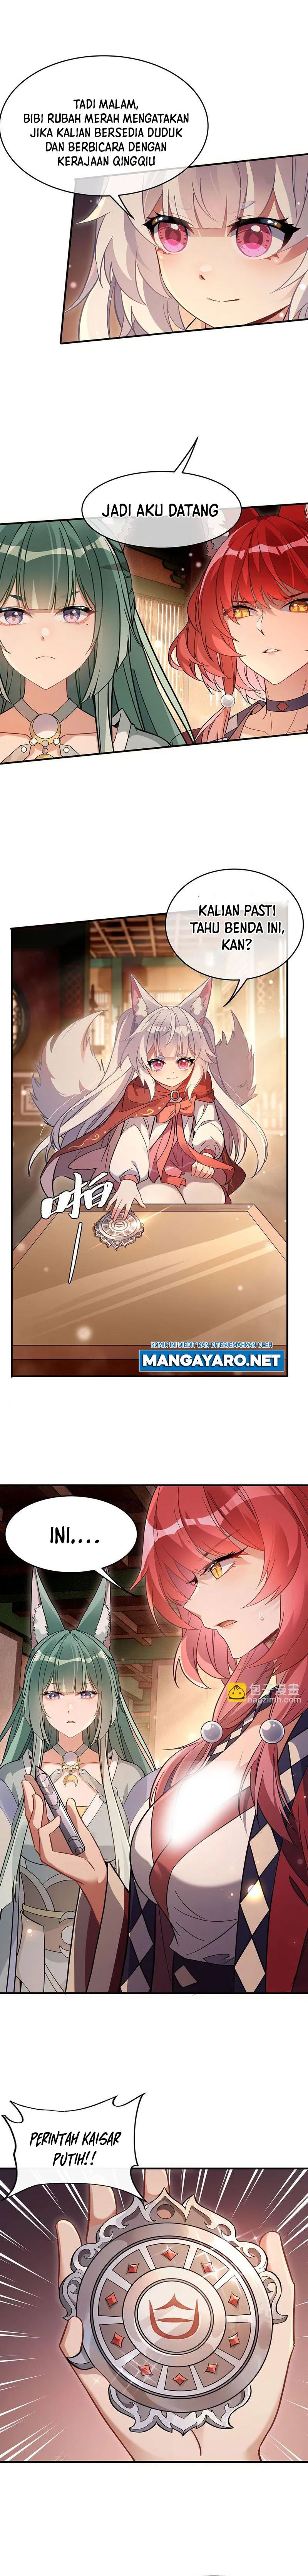 Dilarang COPAS - situs resmi www.mangacanblog.com - Komik my female apprentices are all big shots from the future 213 - chapter 213 214 Indonesia my female apprentices are all big shots from the future 213 - chapter 213 Terbaru 4|Baca Manga Komik Indonesia|Mangacan